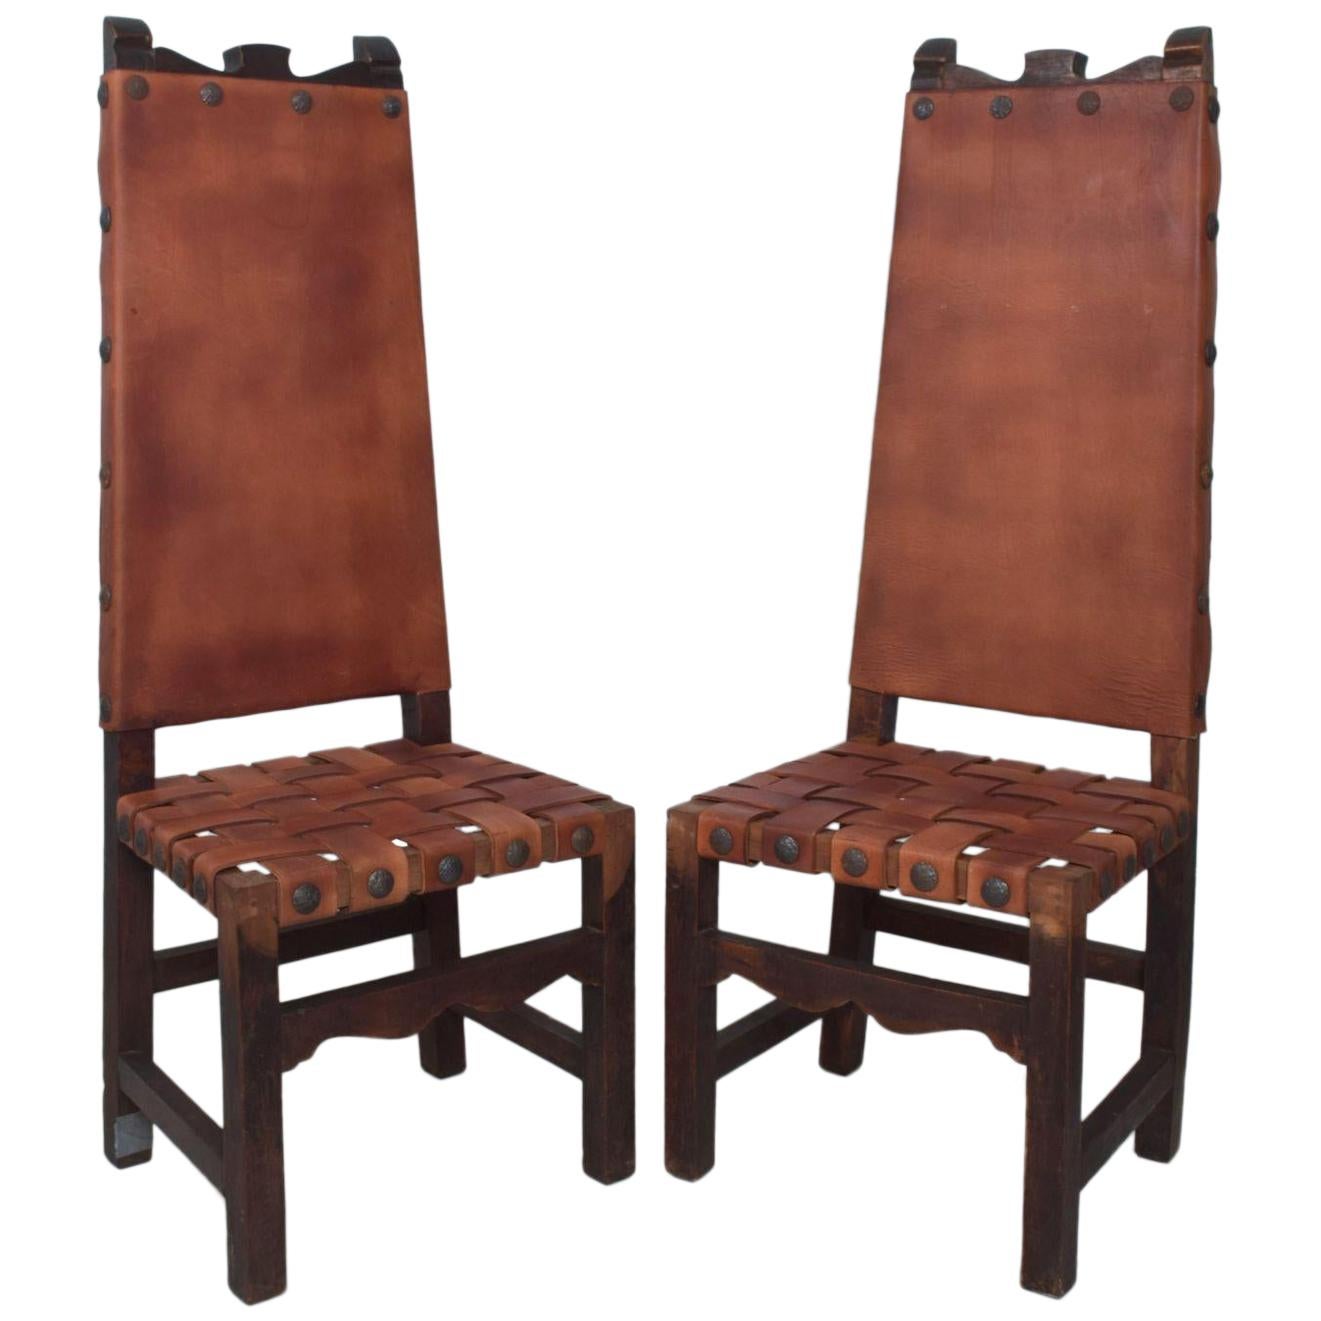 SPANISH Colonial TALL Wood Chairs Woven Saddle Leather style Luis BARRAGAN